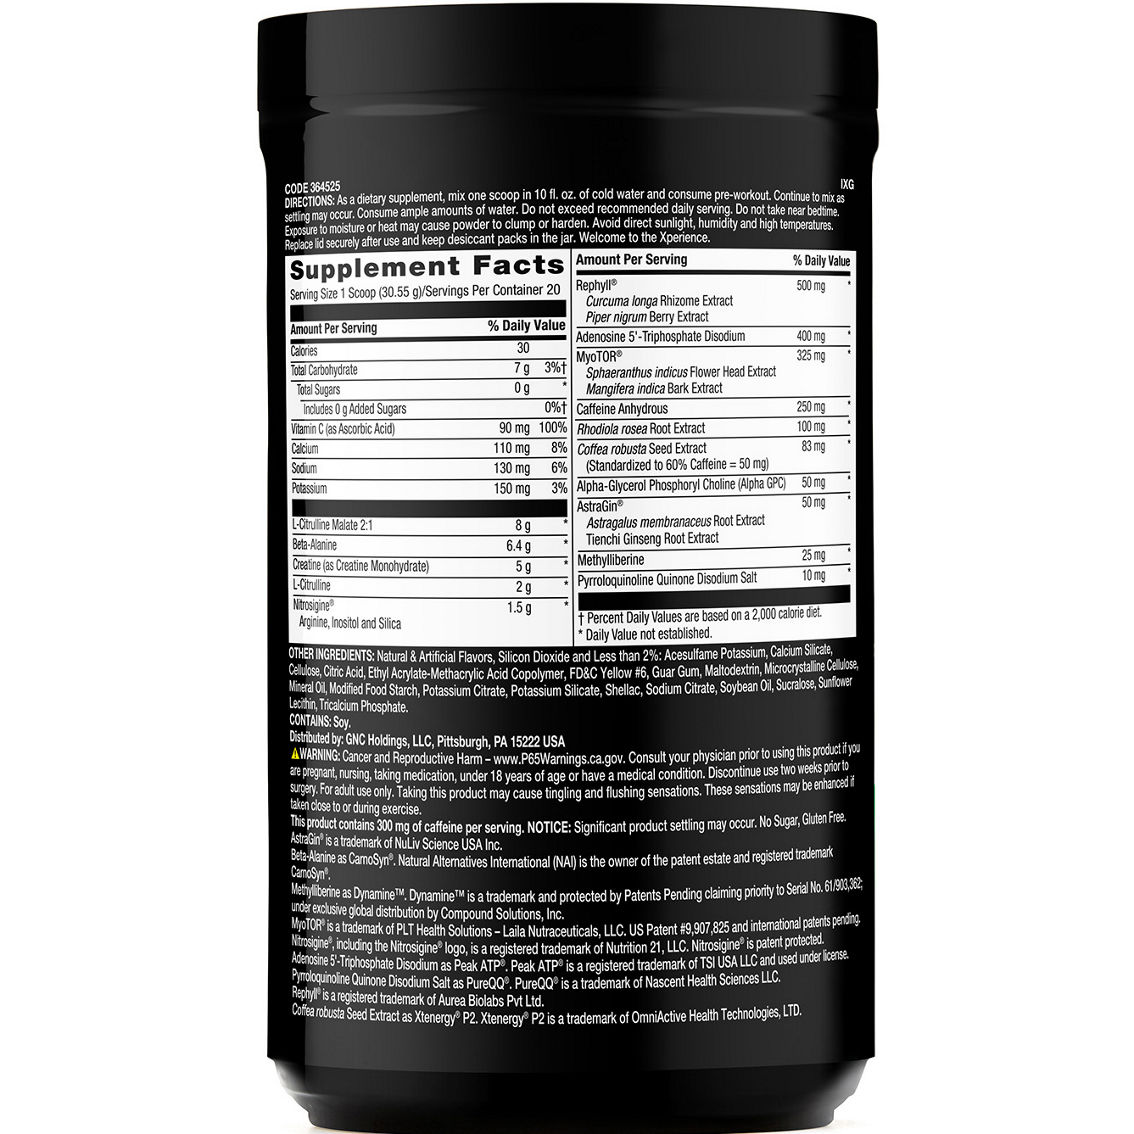 GNC Beyond Raw Concept X 20 Servings - Image 2 of 2